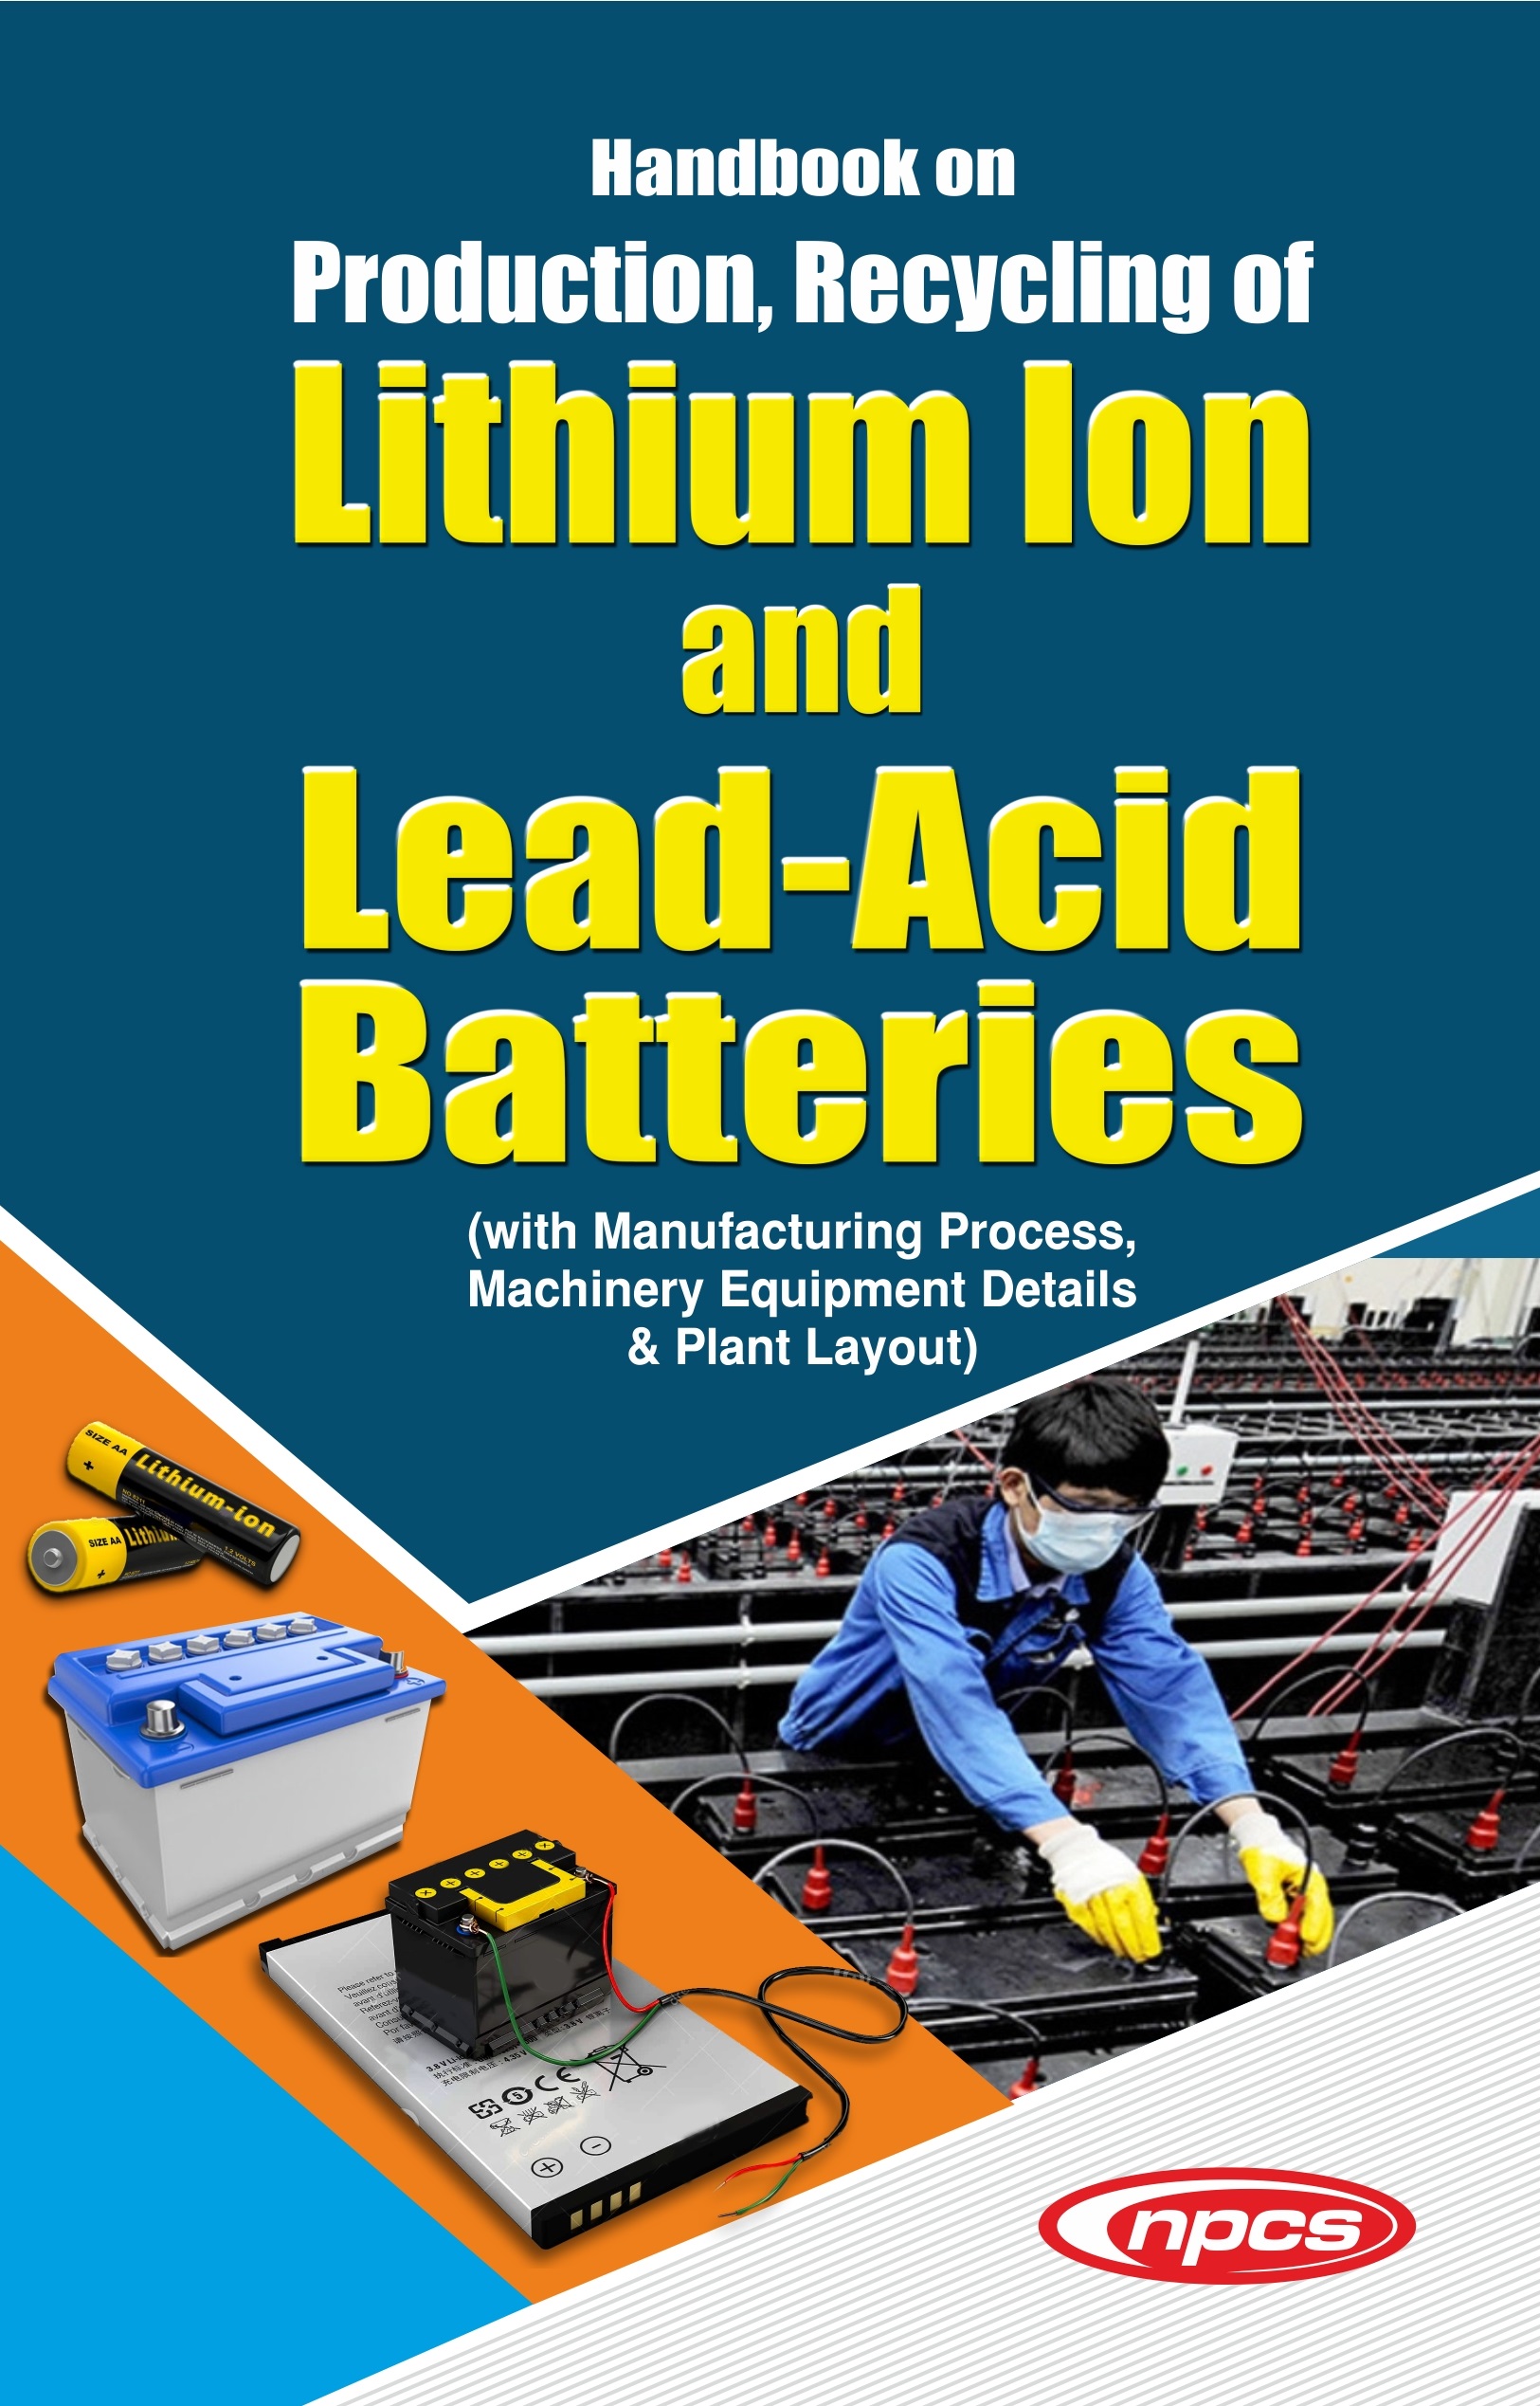 'Battery Production, Recycling, Lithium Ion, Lead-Acid Batteries